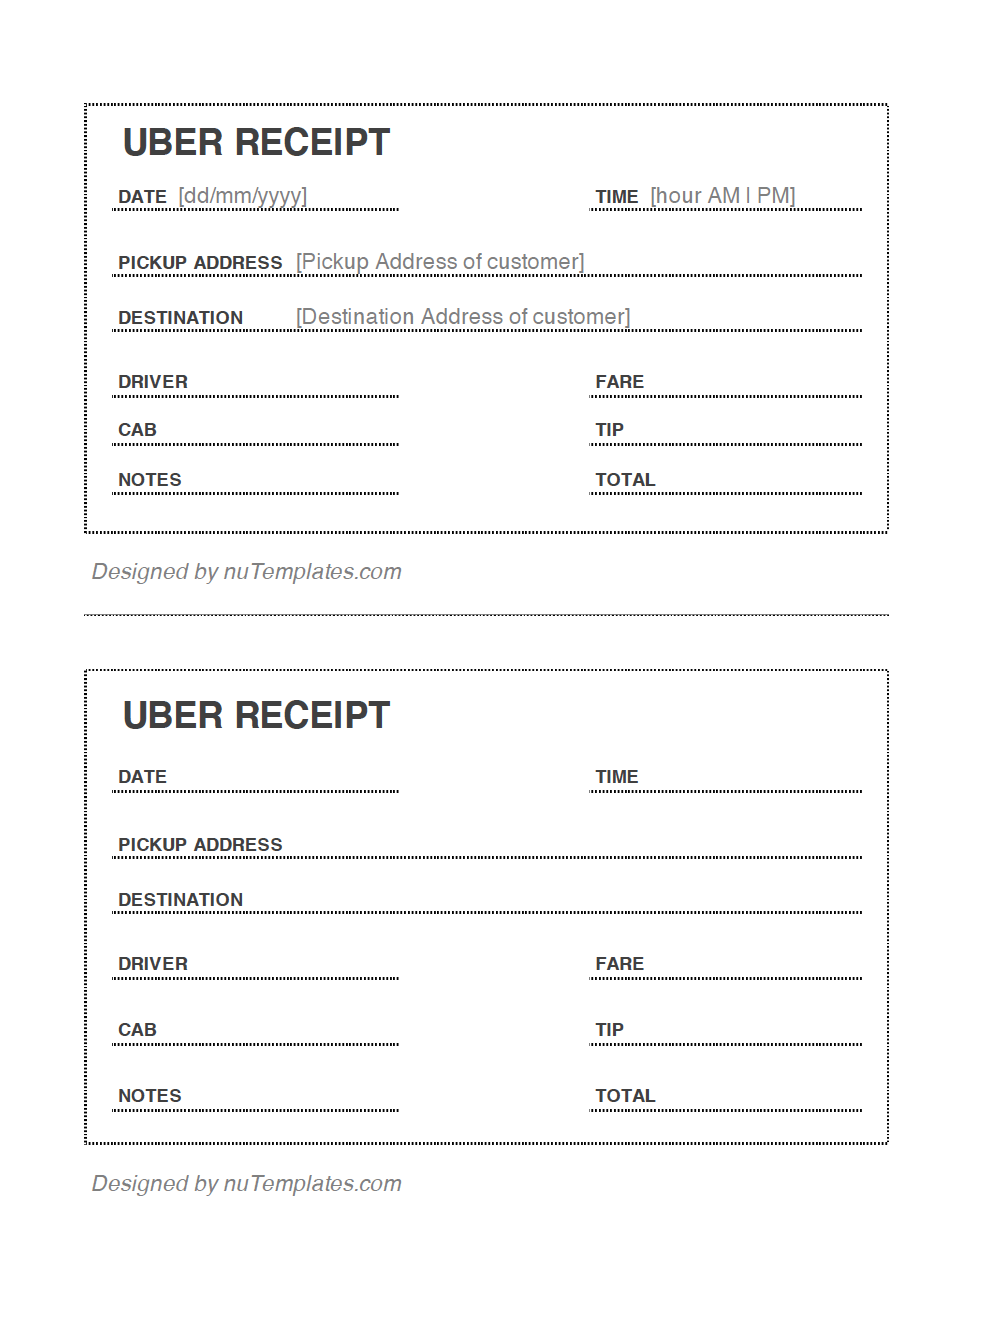 fake-uber-receipt-template-printable-word-searches